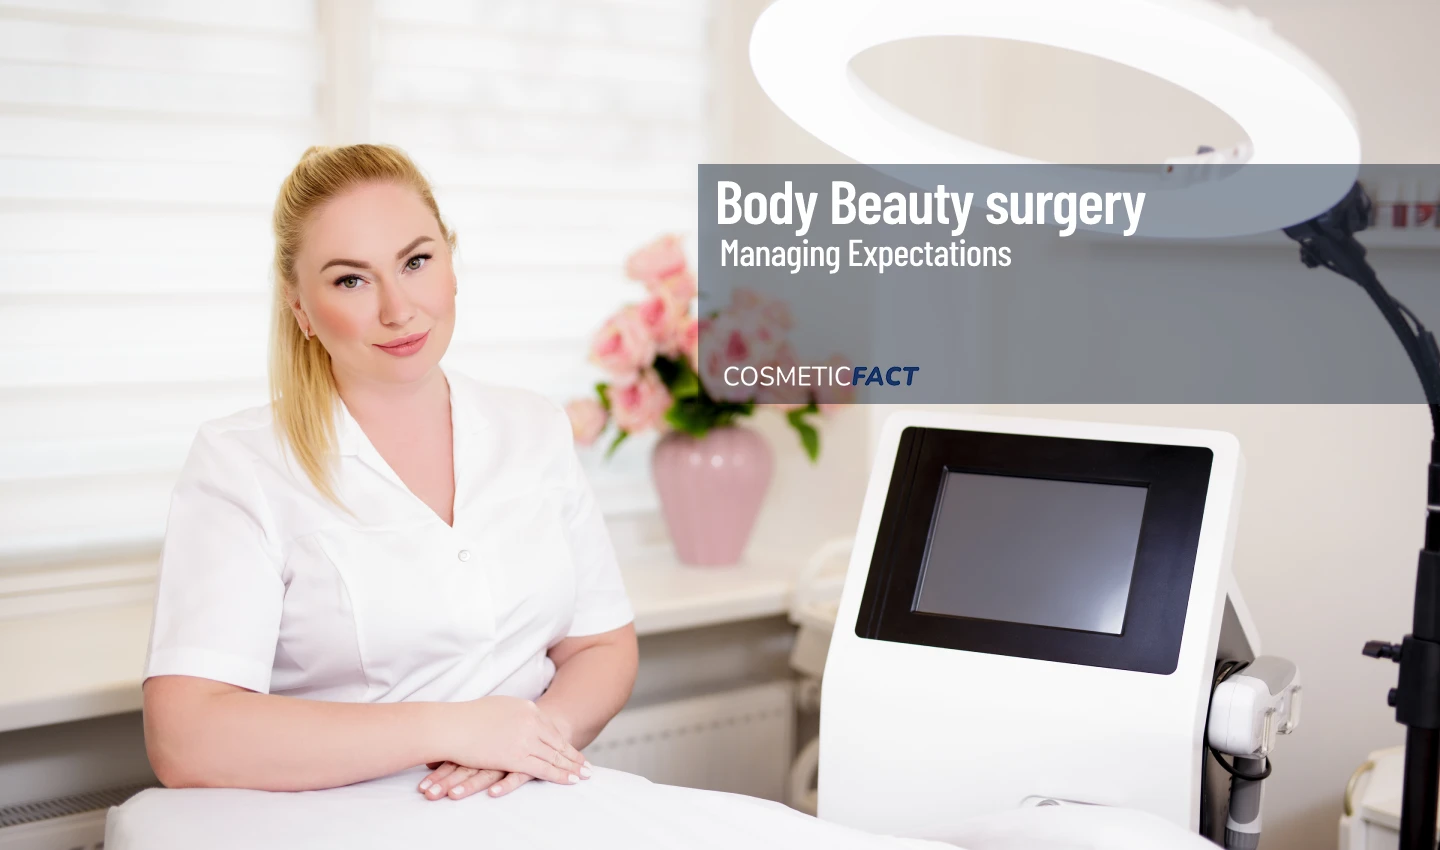 A doctor sitting in conversation with a patient, discussing setting realistic expectations for body beauty surgery.